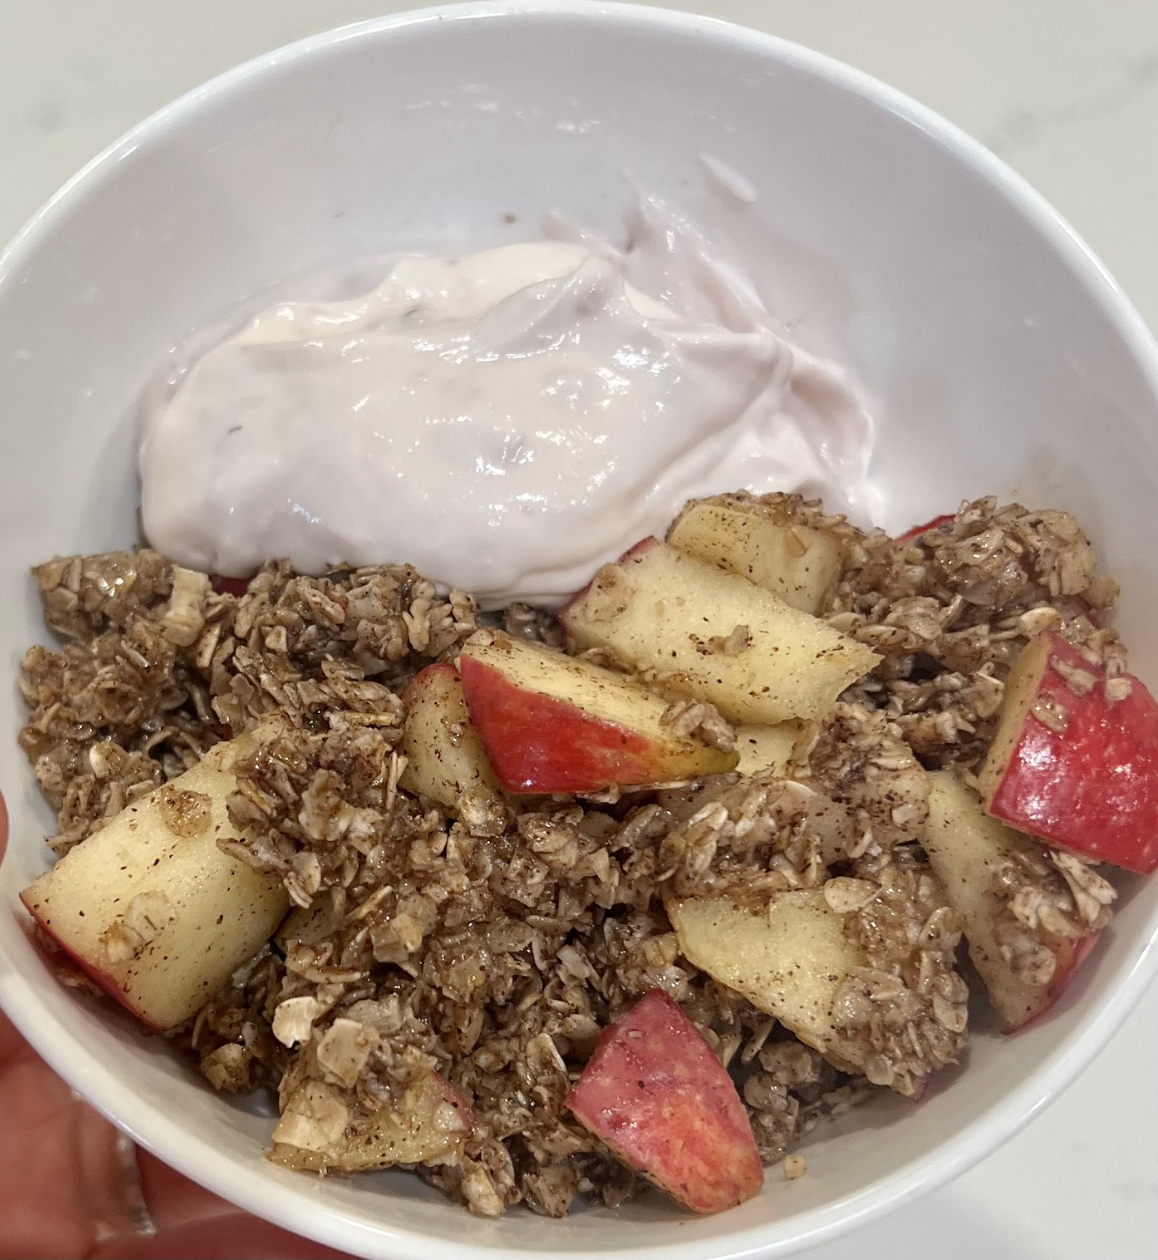 yogurt, oats, and apples combined in a bowl